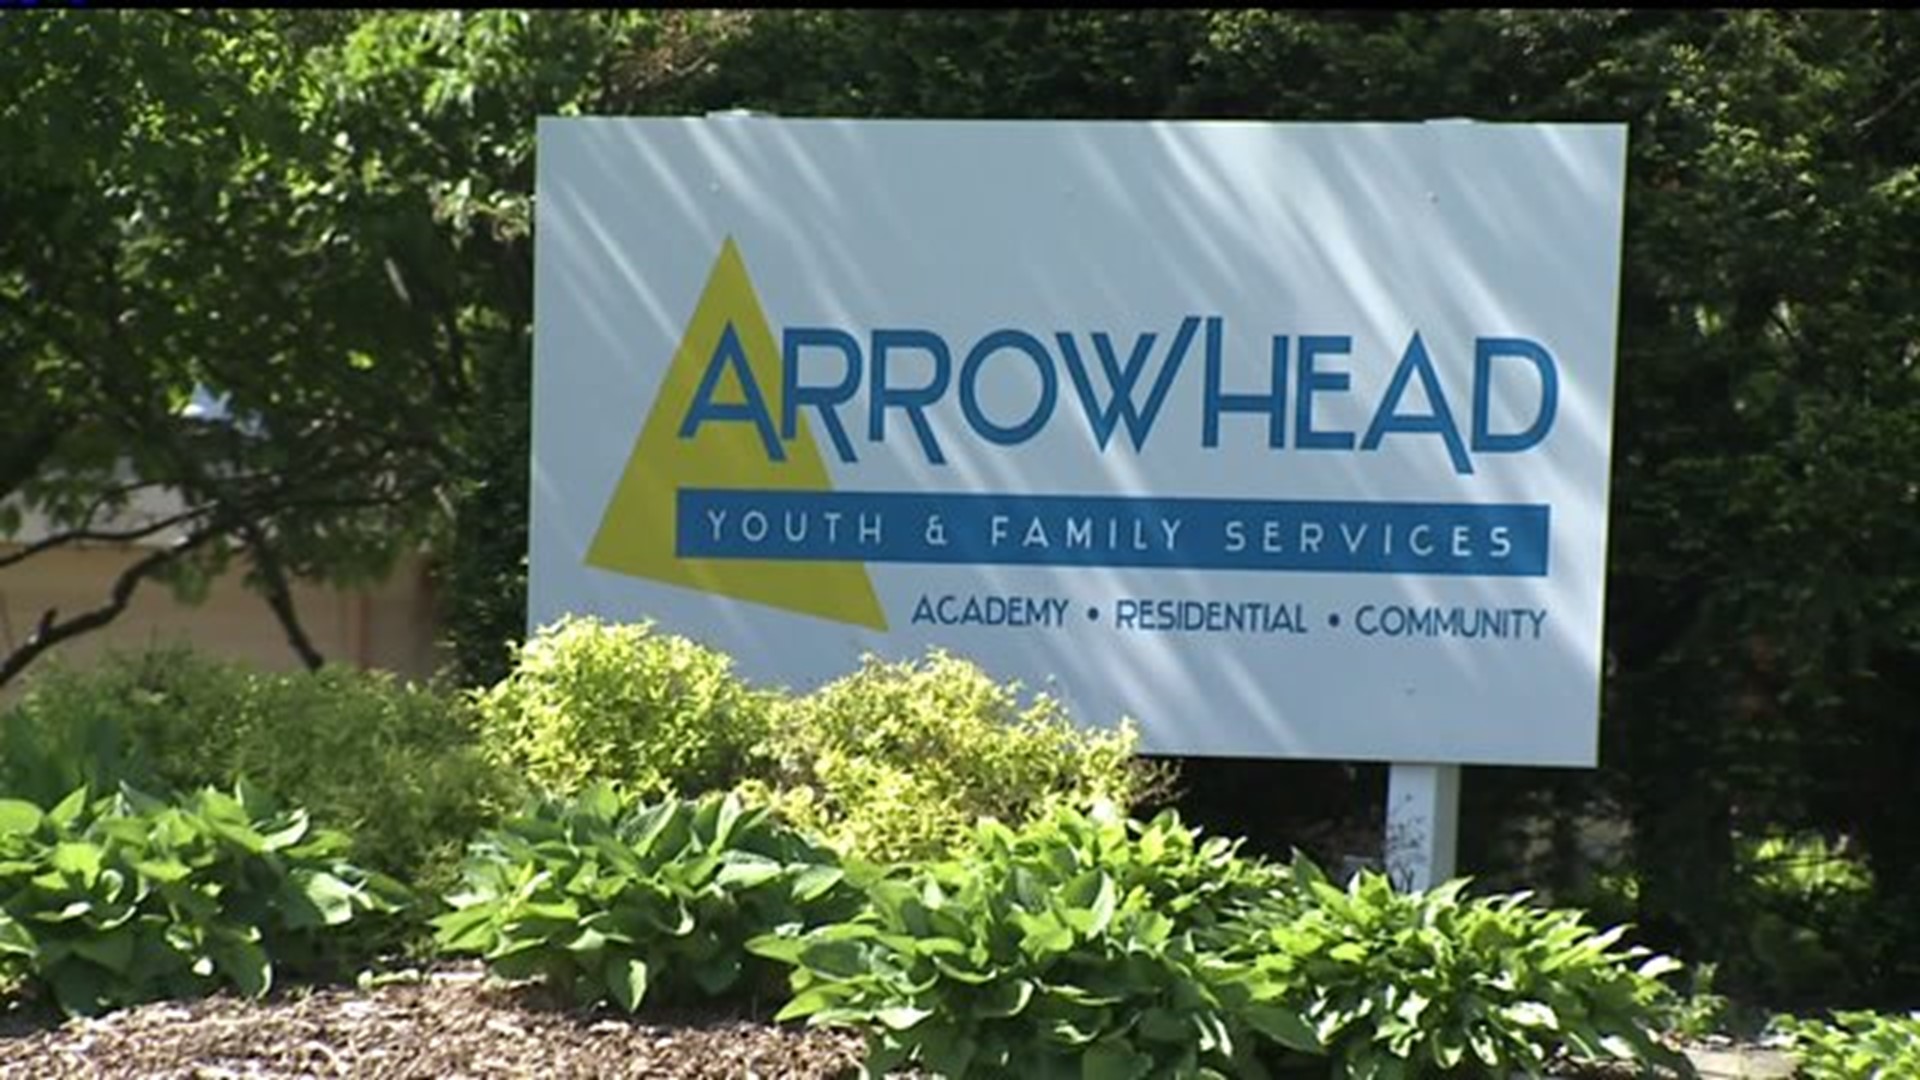 Chris Minor Investigates: Teen sex abuse allegations at youth-treatment facility